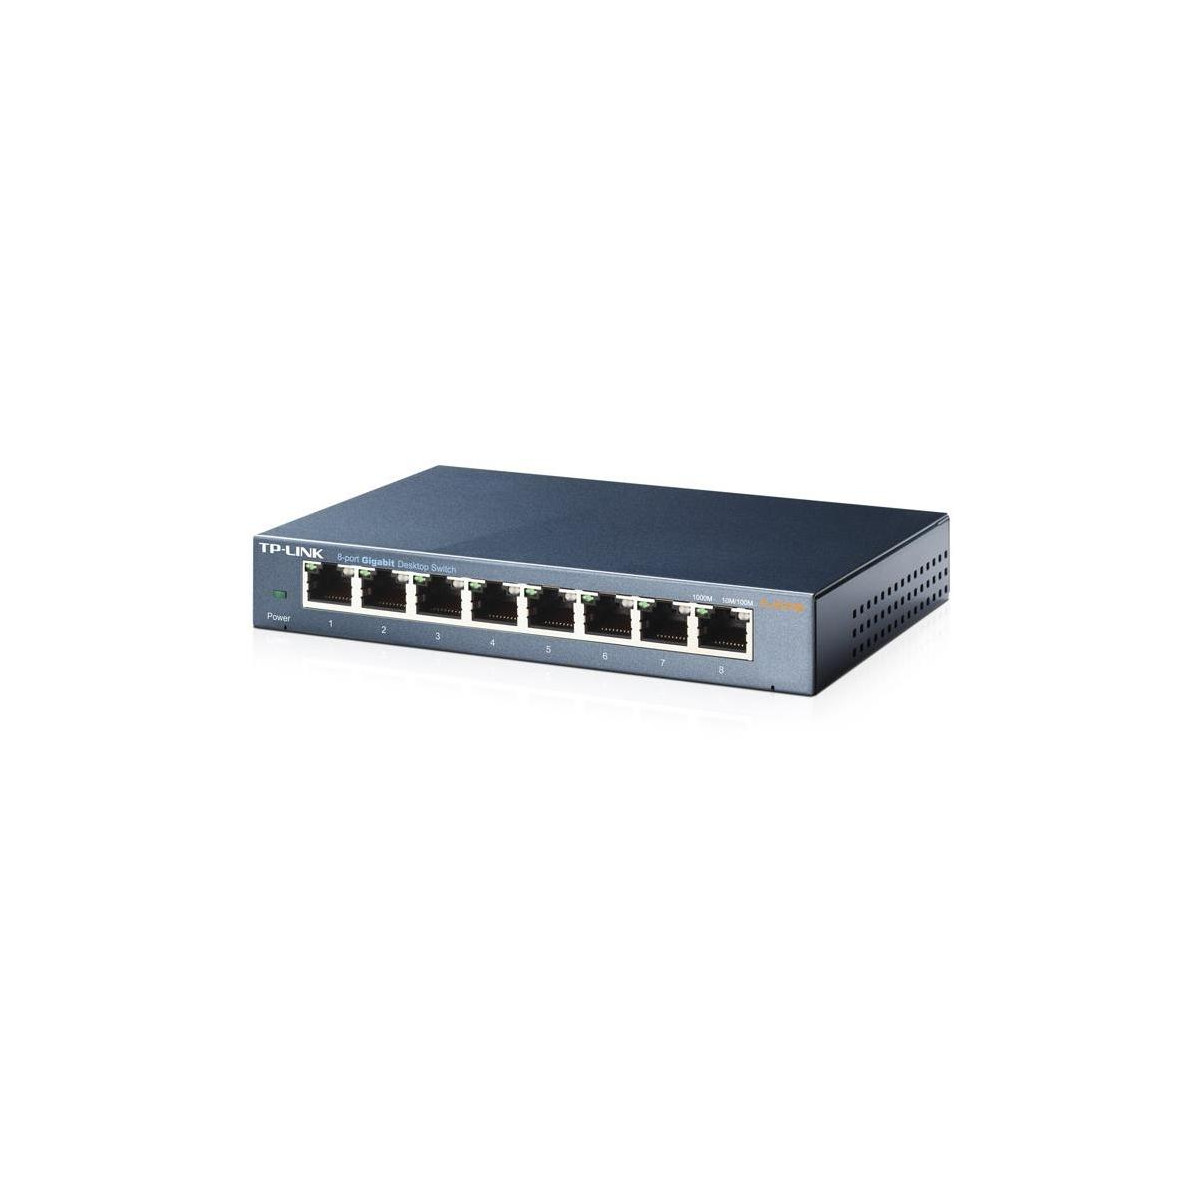 More about Switch TP-LINK TL-SG108